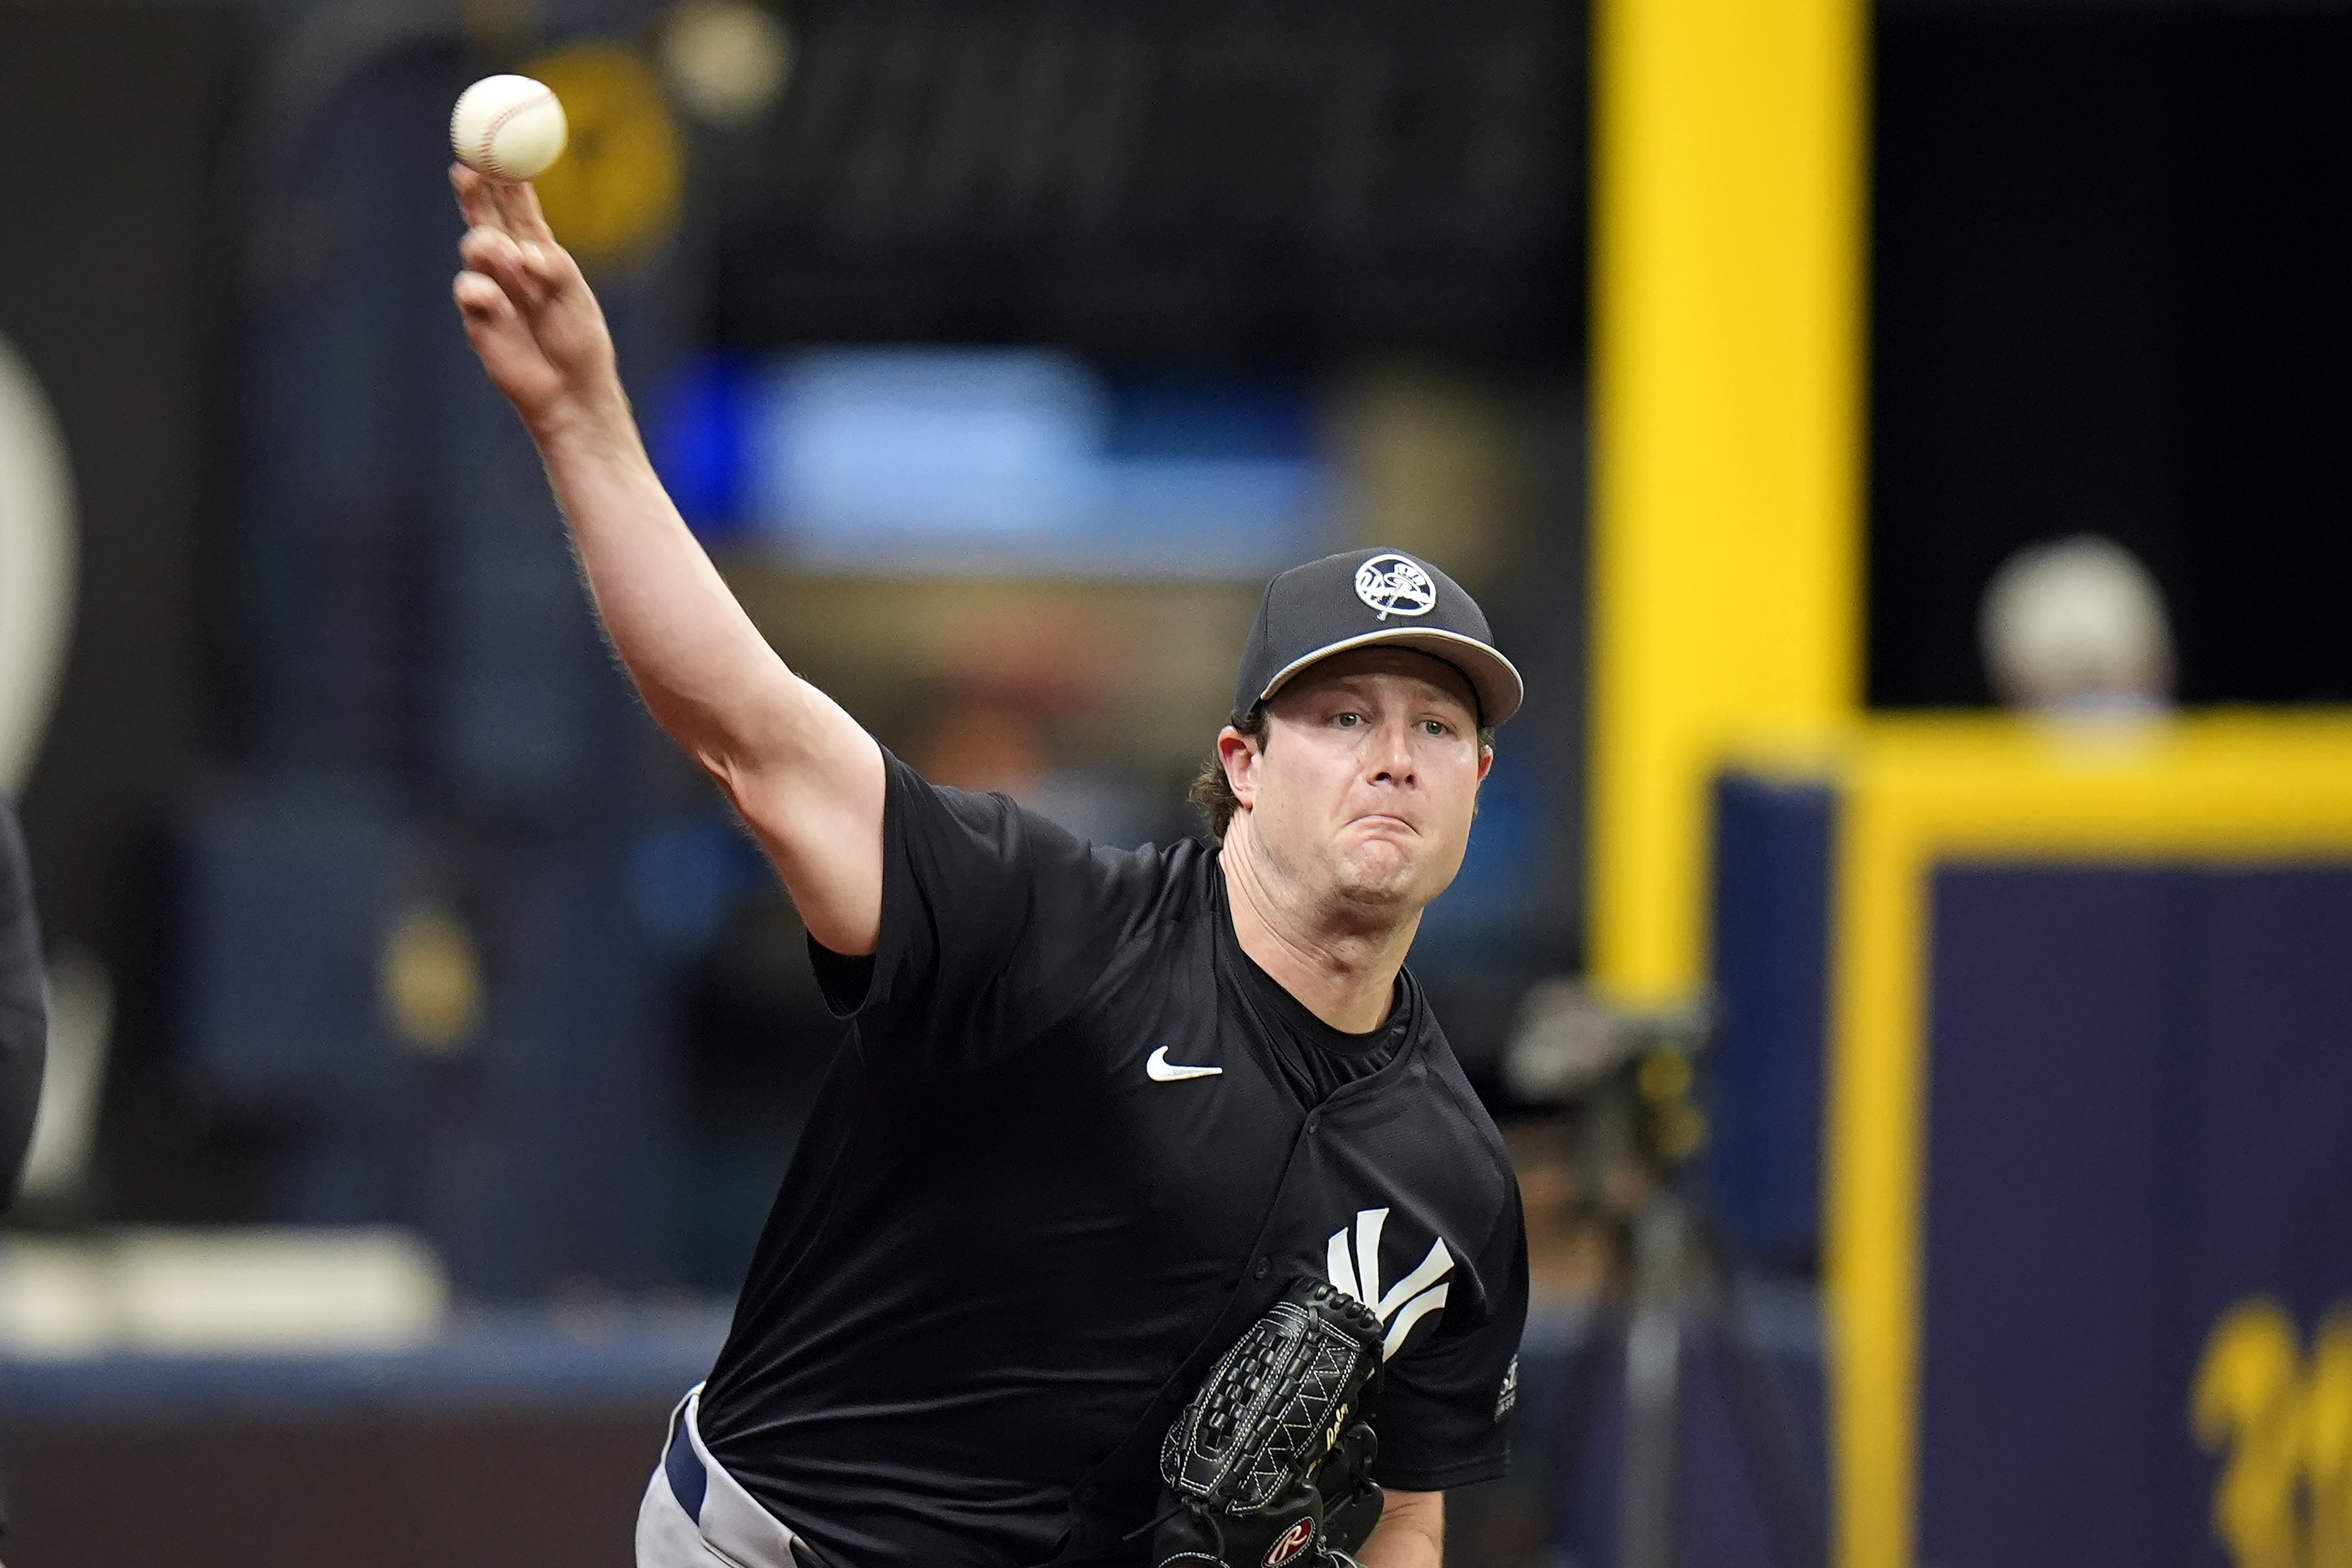 Yankees ace Gerrit Cole throws 3 1/3 shutout innings in first 